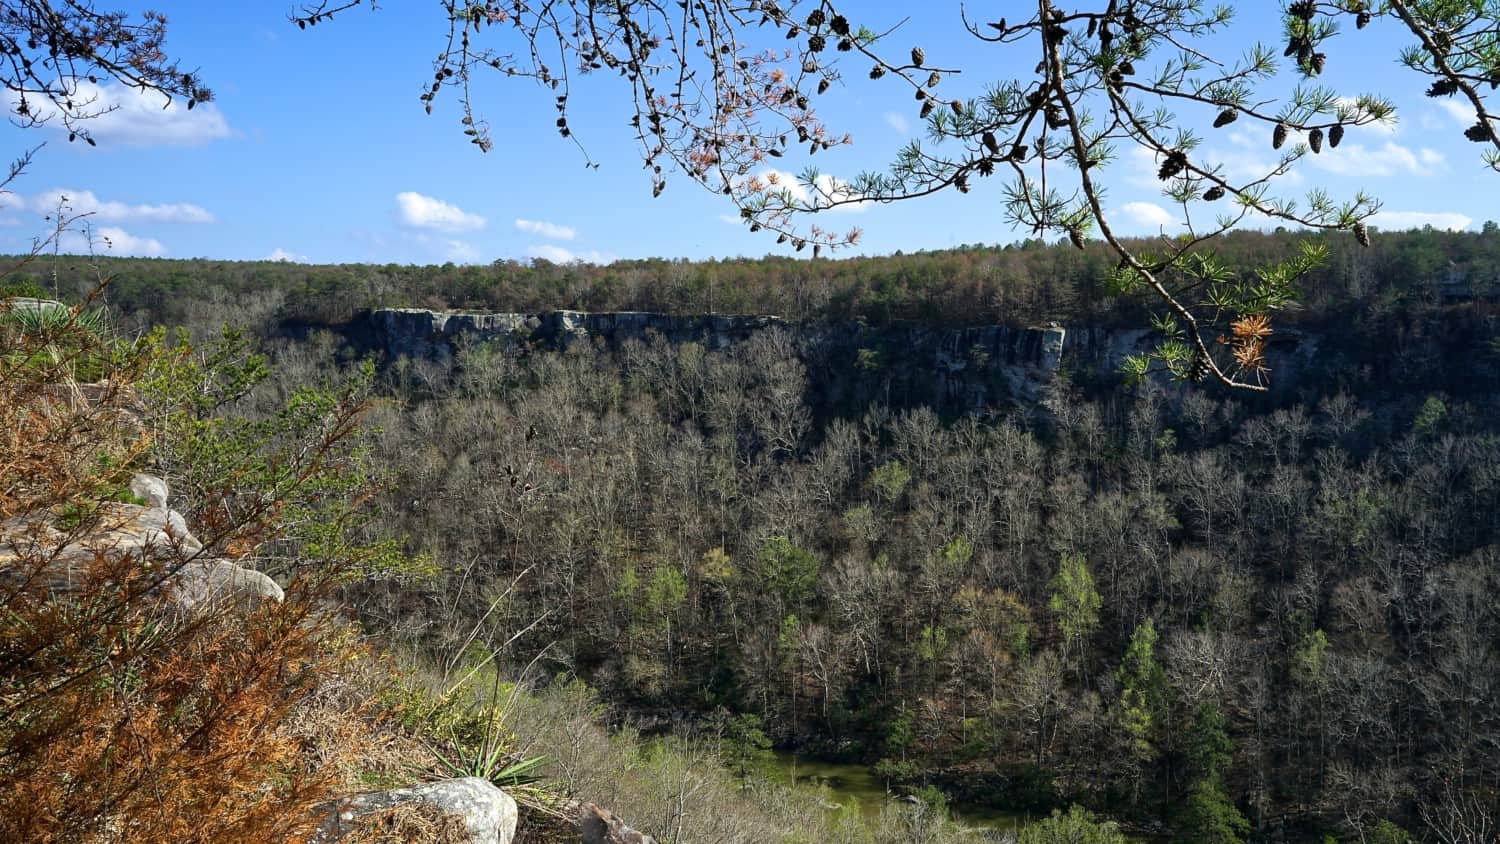 Alabama's Top Pet Friendly Attraction: Little River Canyon | GoPetFriendly.com